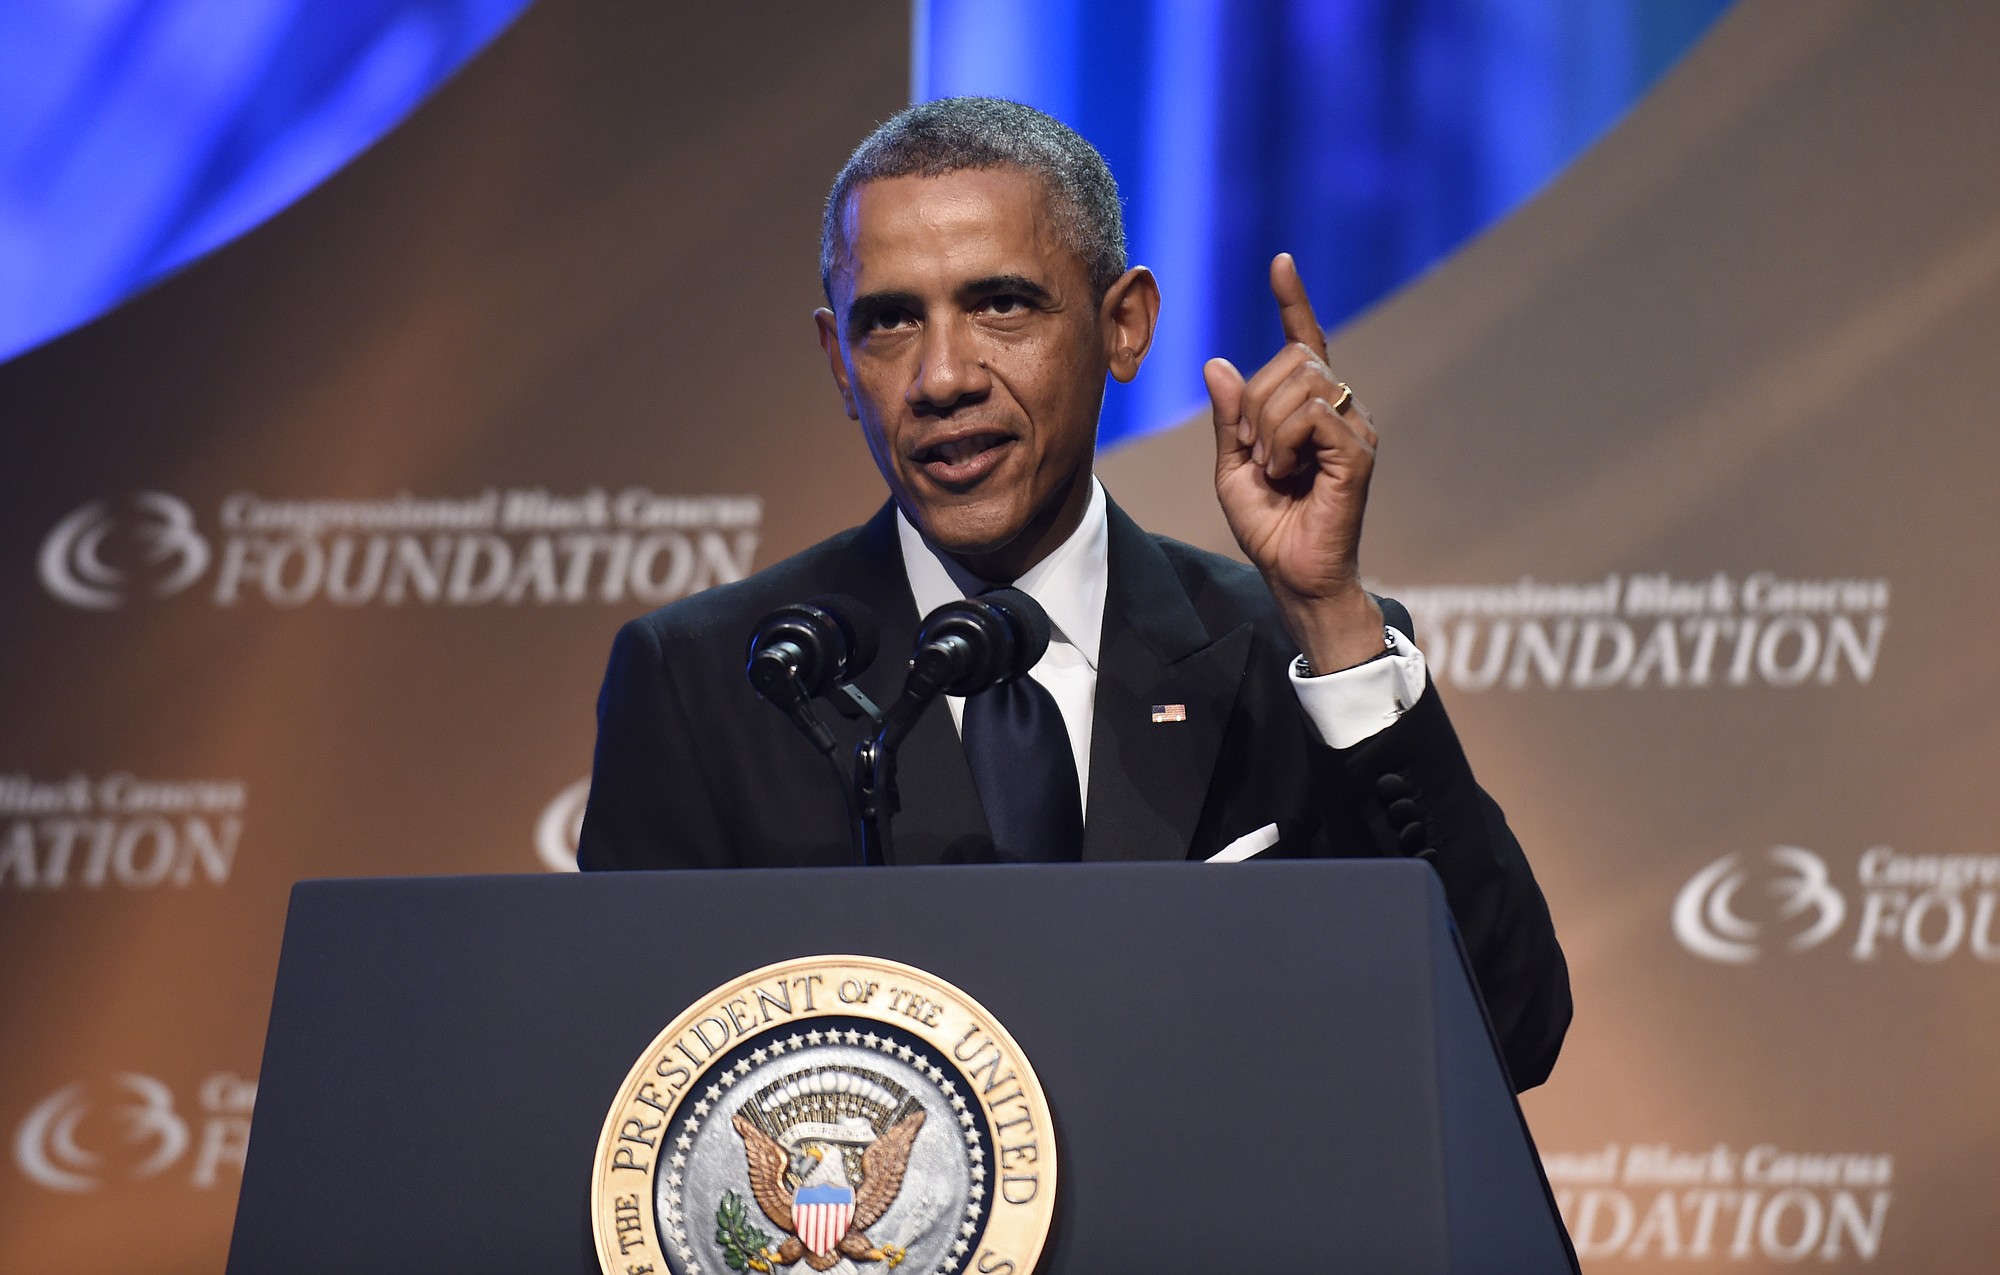 President Barack Obama speaks at the Congressional Black Caucus Foundation's 44th Annual Legislative Conference Phoenix Awards Dinner in Washington in Saturday.